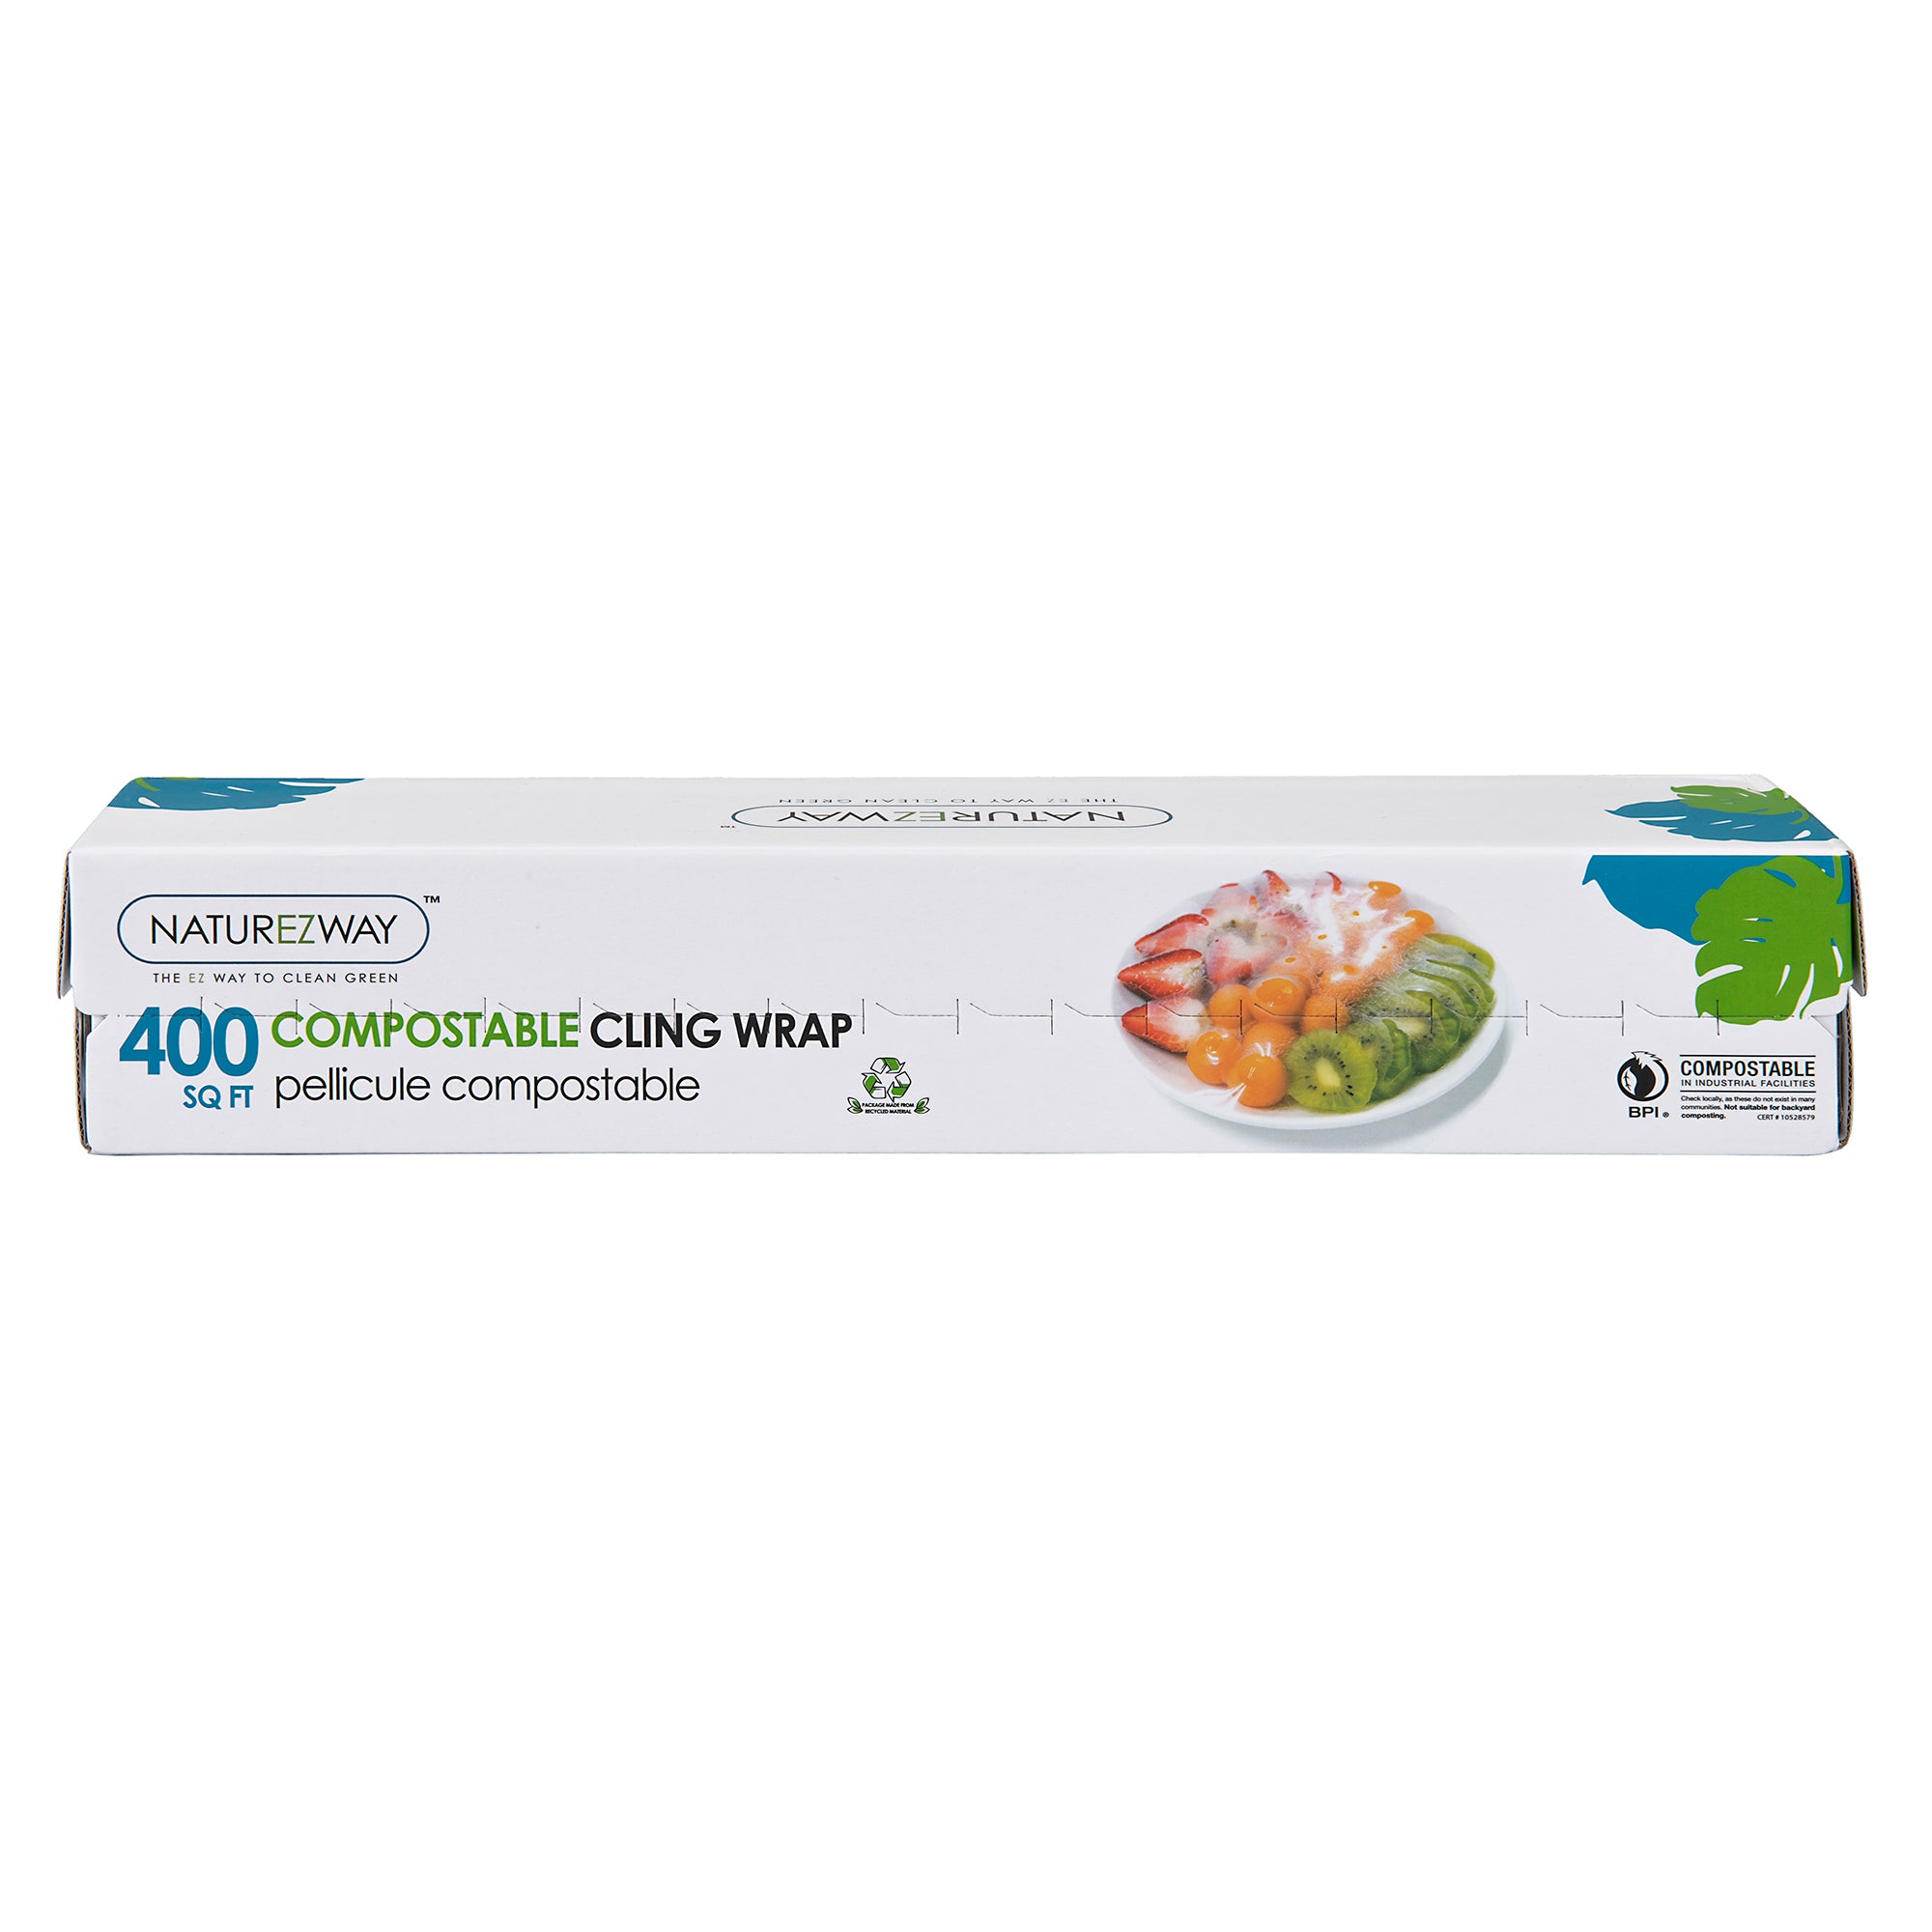 1 Roll) Food Cling Wrap Compostable, NATUREZWAY